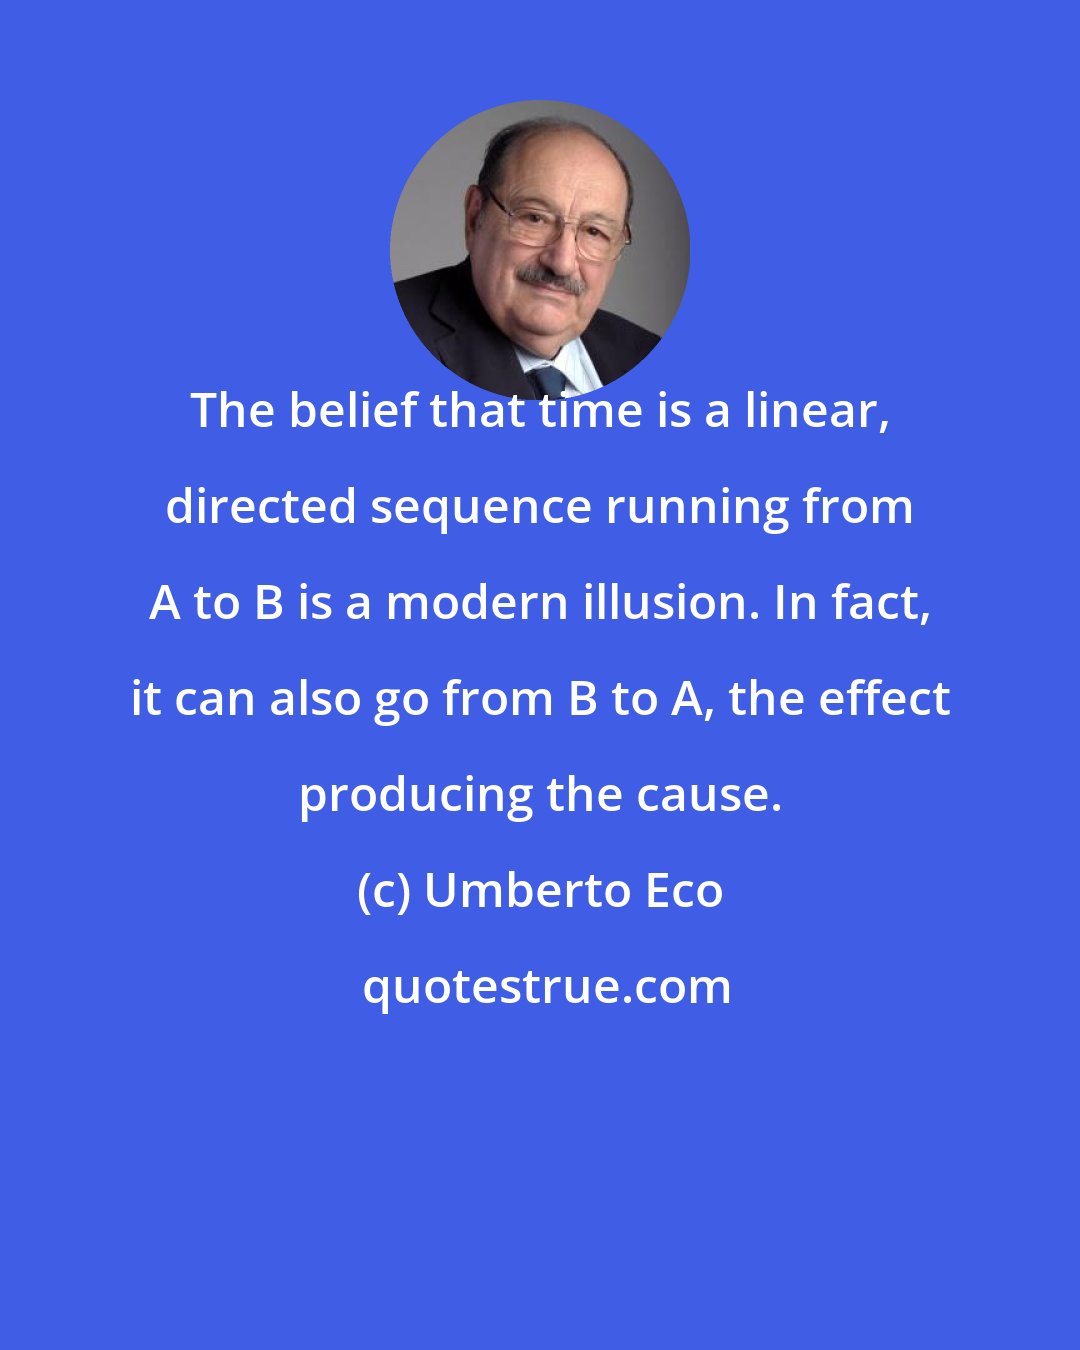 Umberto Eco: The belief that time is a linear, directed sequence running from A to B is a modern illusion. In fact, it can also go from B to A, the effect producing the cause.